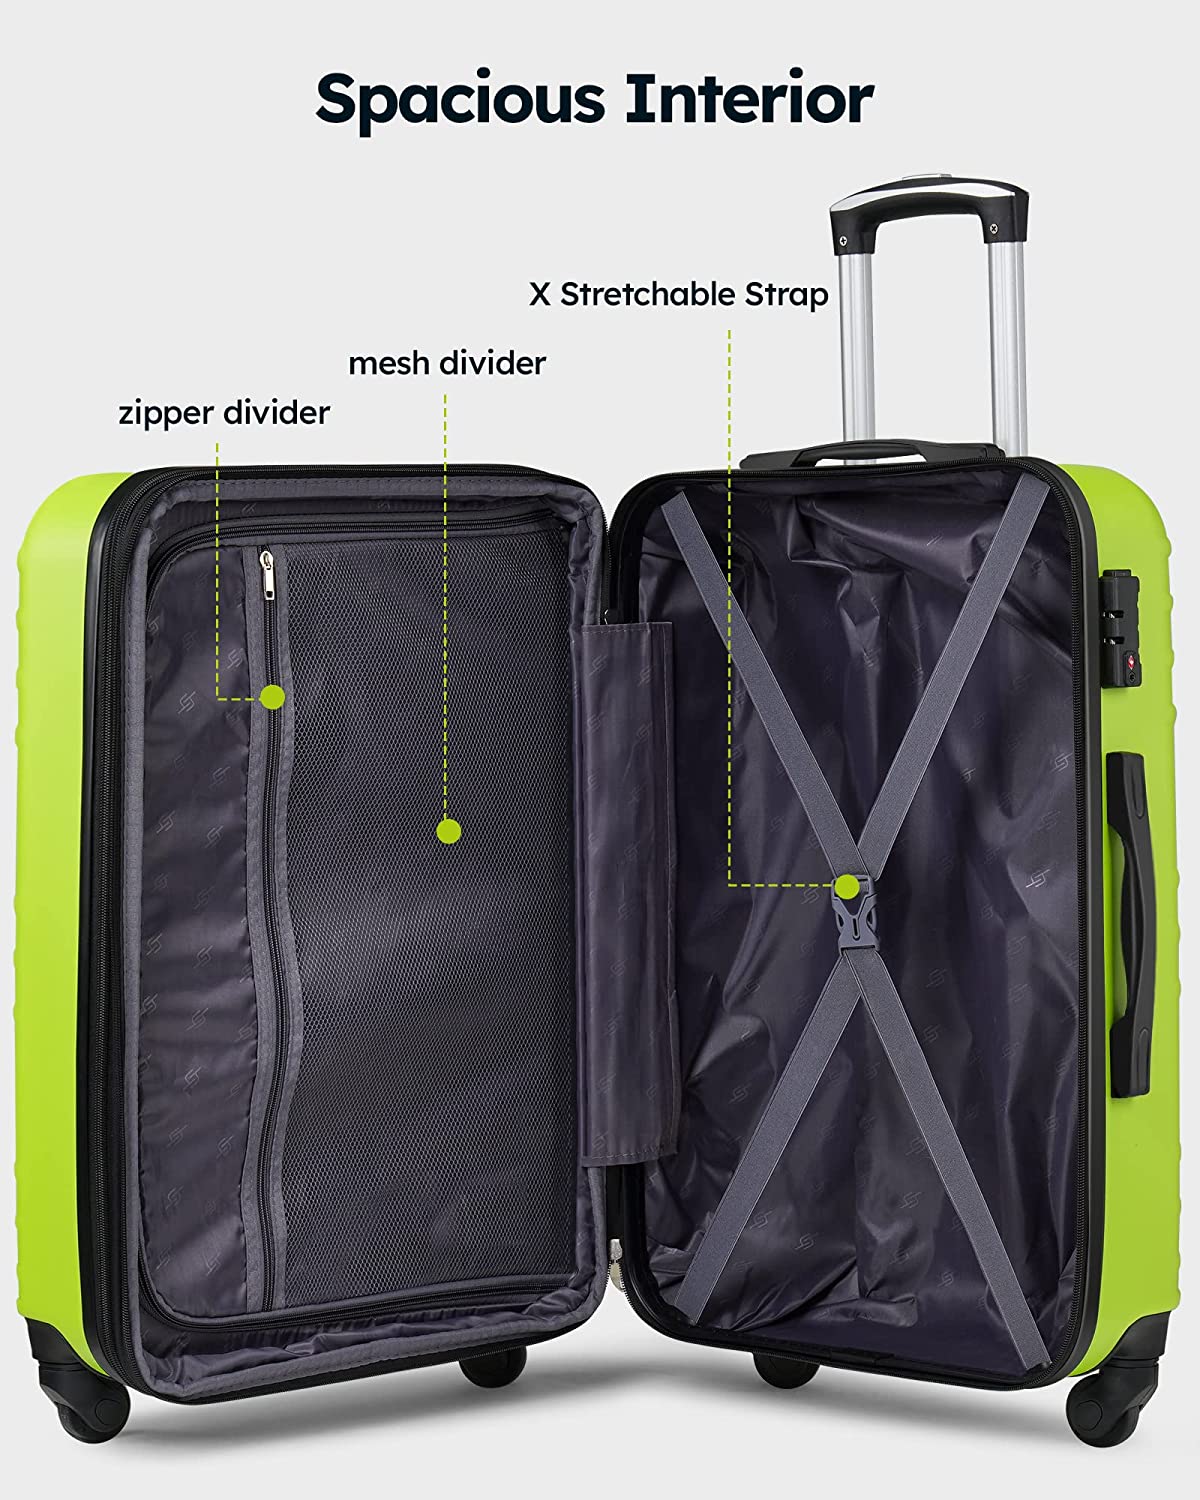 SUITOUR Luggage Sets 3PCS Hard Shell, Green Lime | Racktodoor